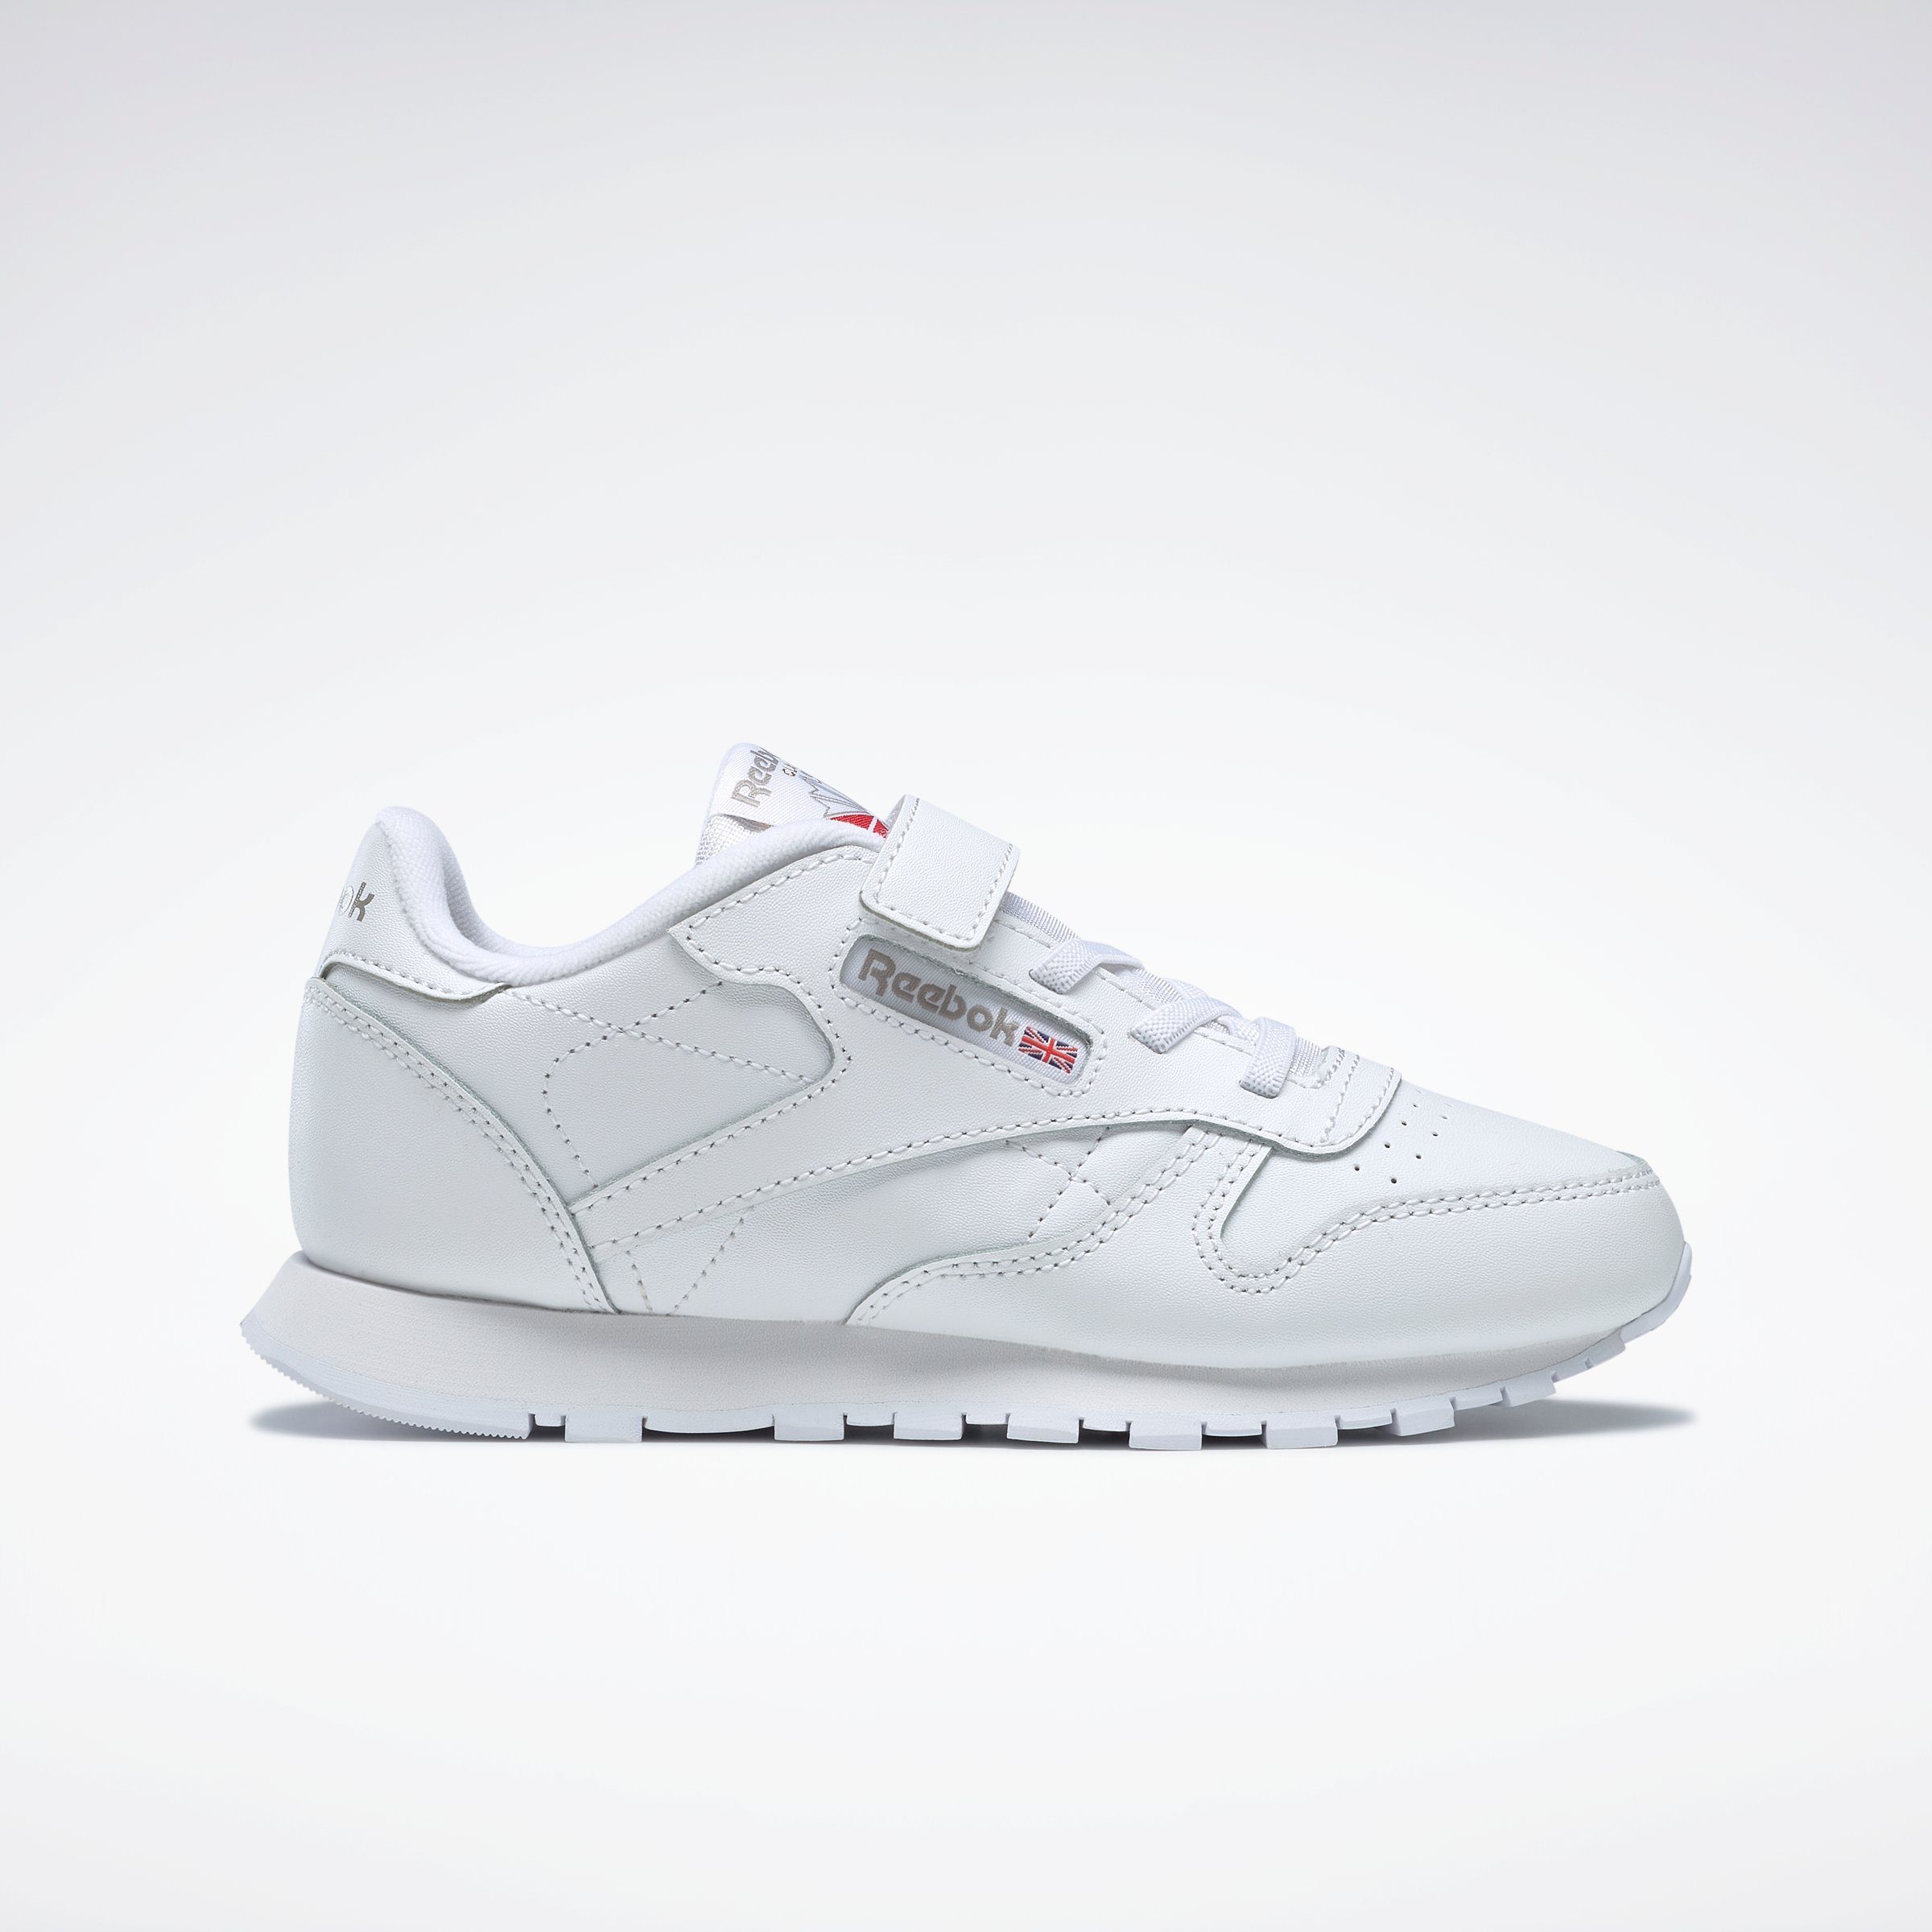 CLASSIC Sneaker Classic SHOES LEATHER Reebok